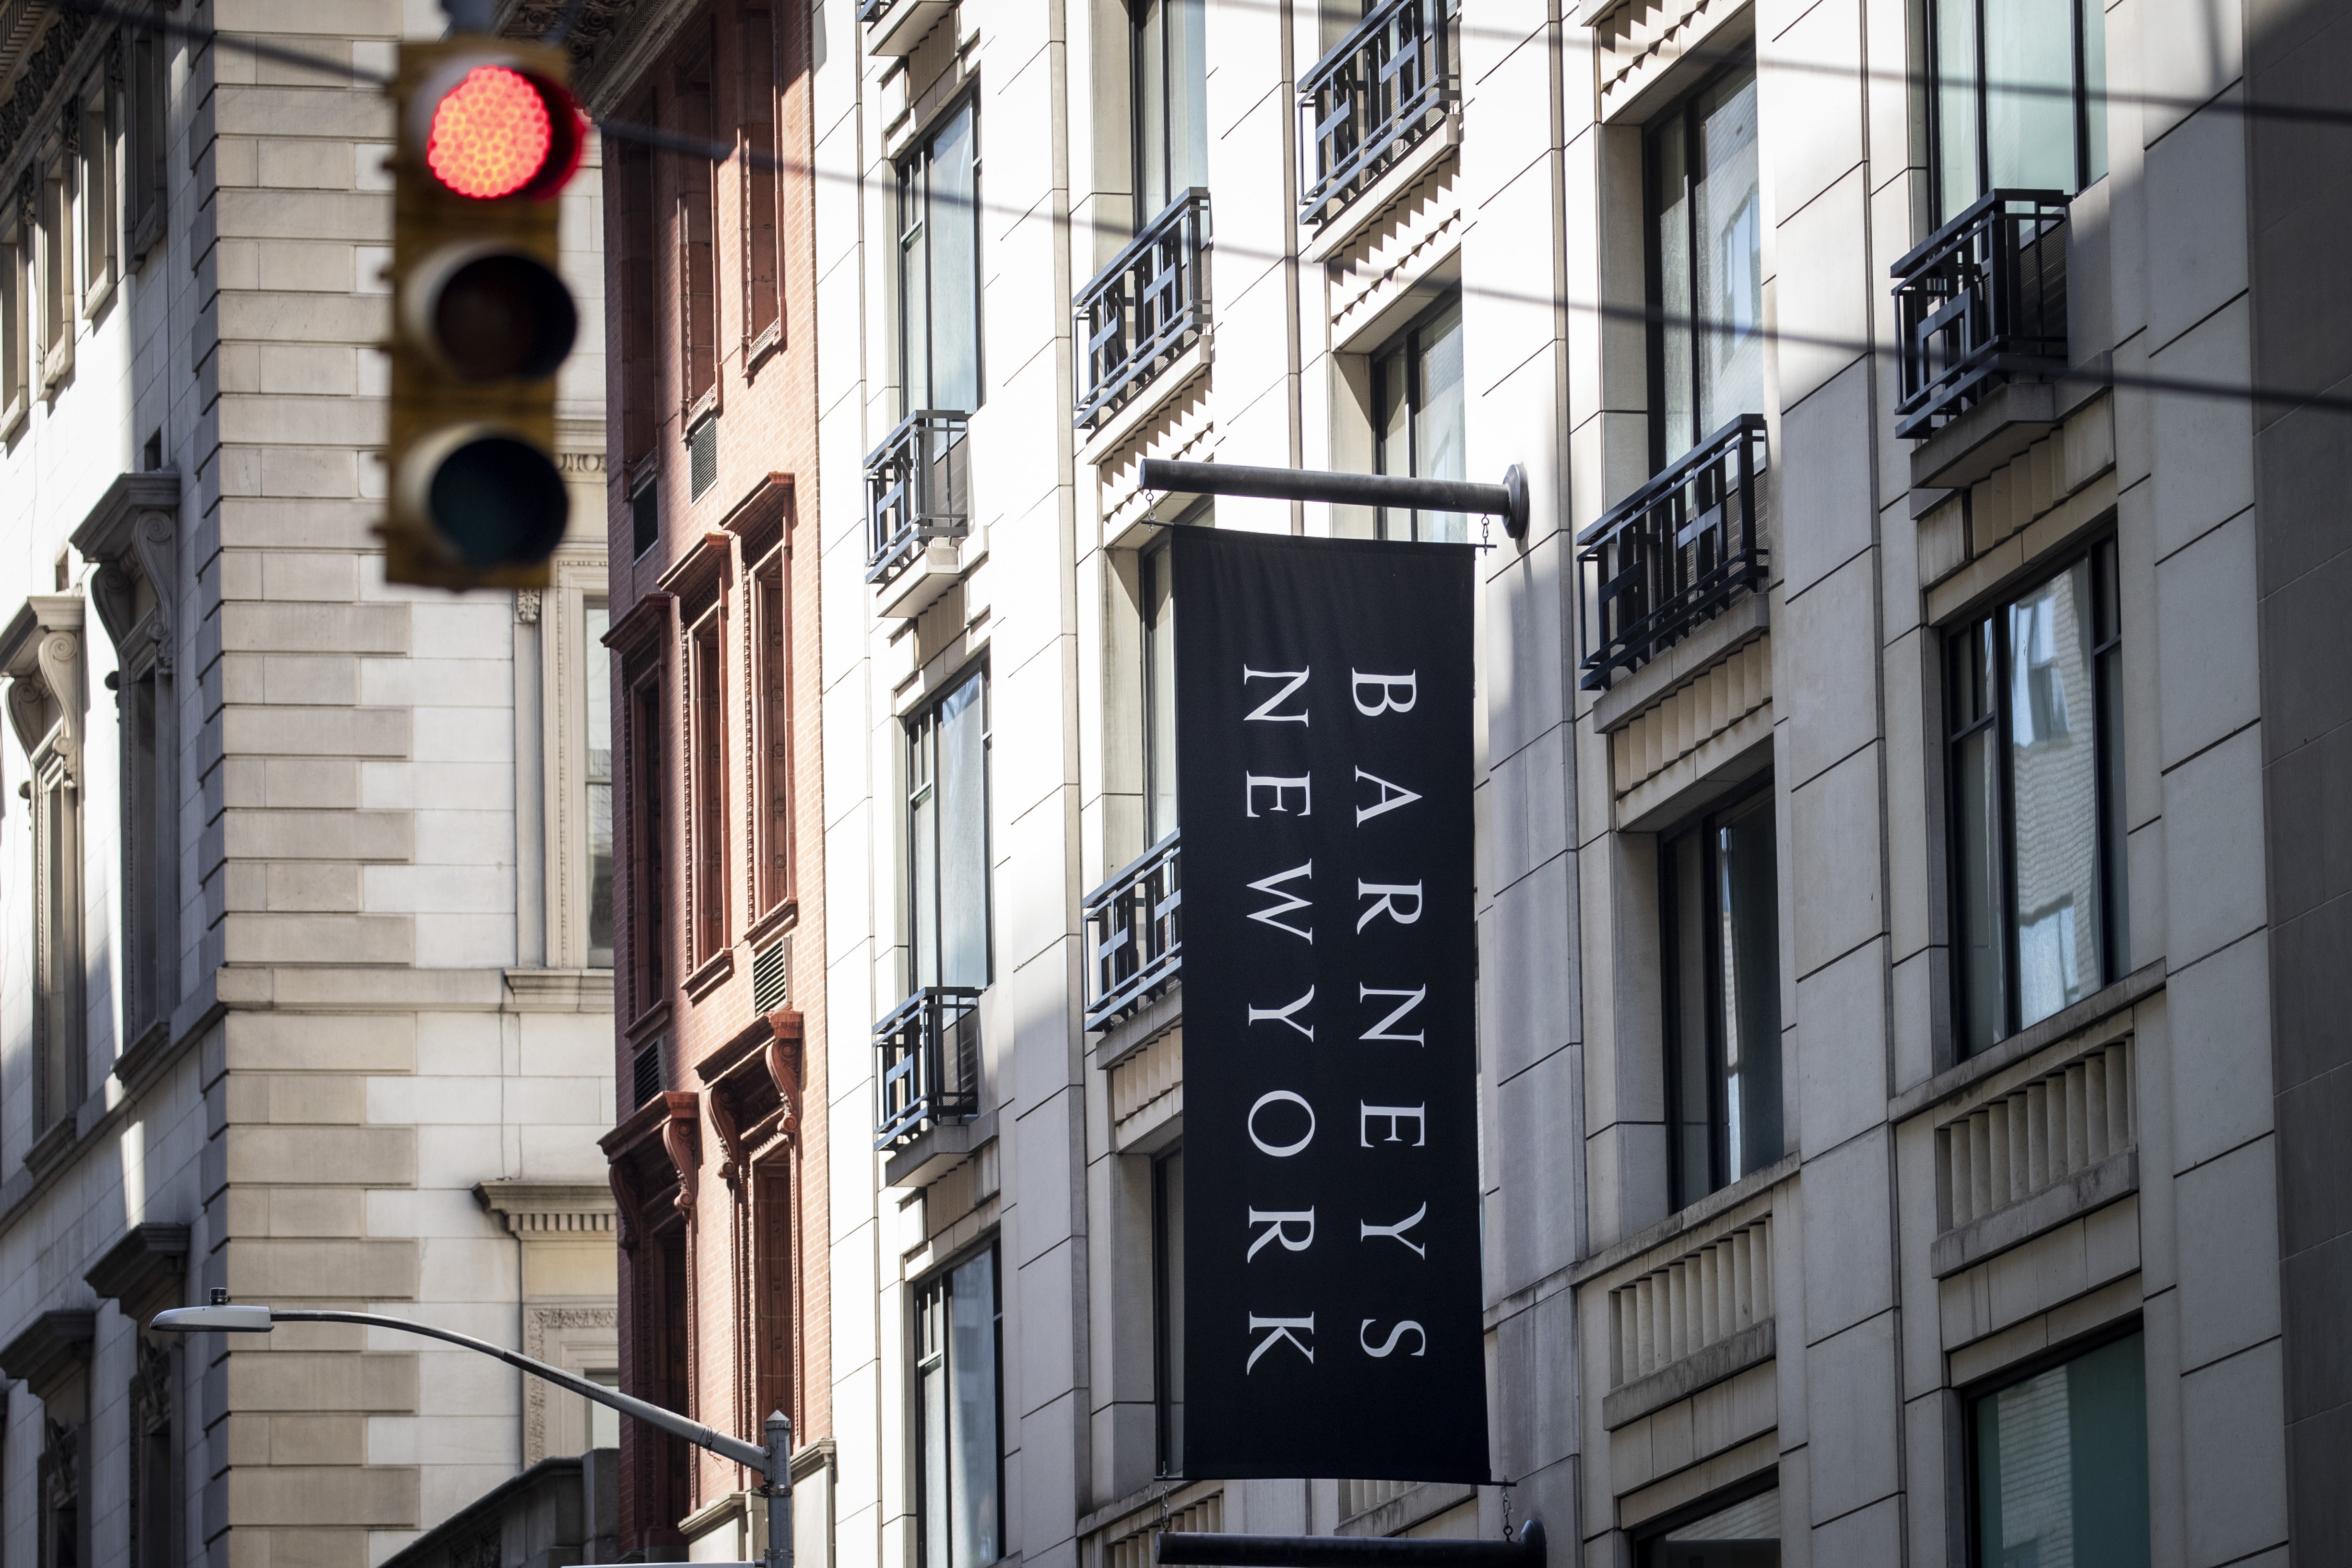 NEW YORK, NY - JULY 15: Signage for Barneys New York hangs on the side of the store in Midtown Manhattan, July 15, 2019 in New York City. According to news reports, Barneys New York, an American chain of luxury department stores, is considering a bankrupt (Foto: Getty Images)